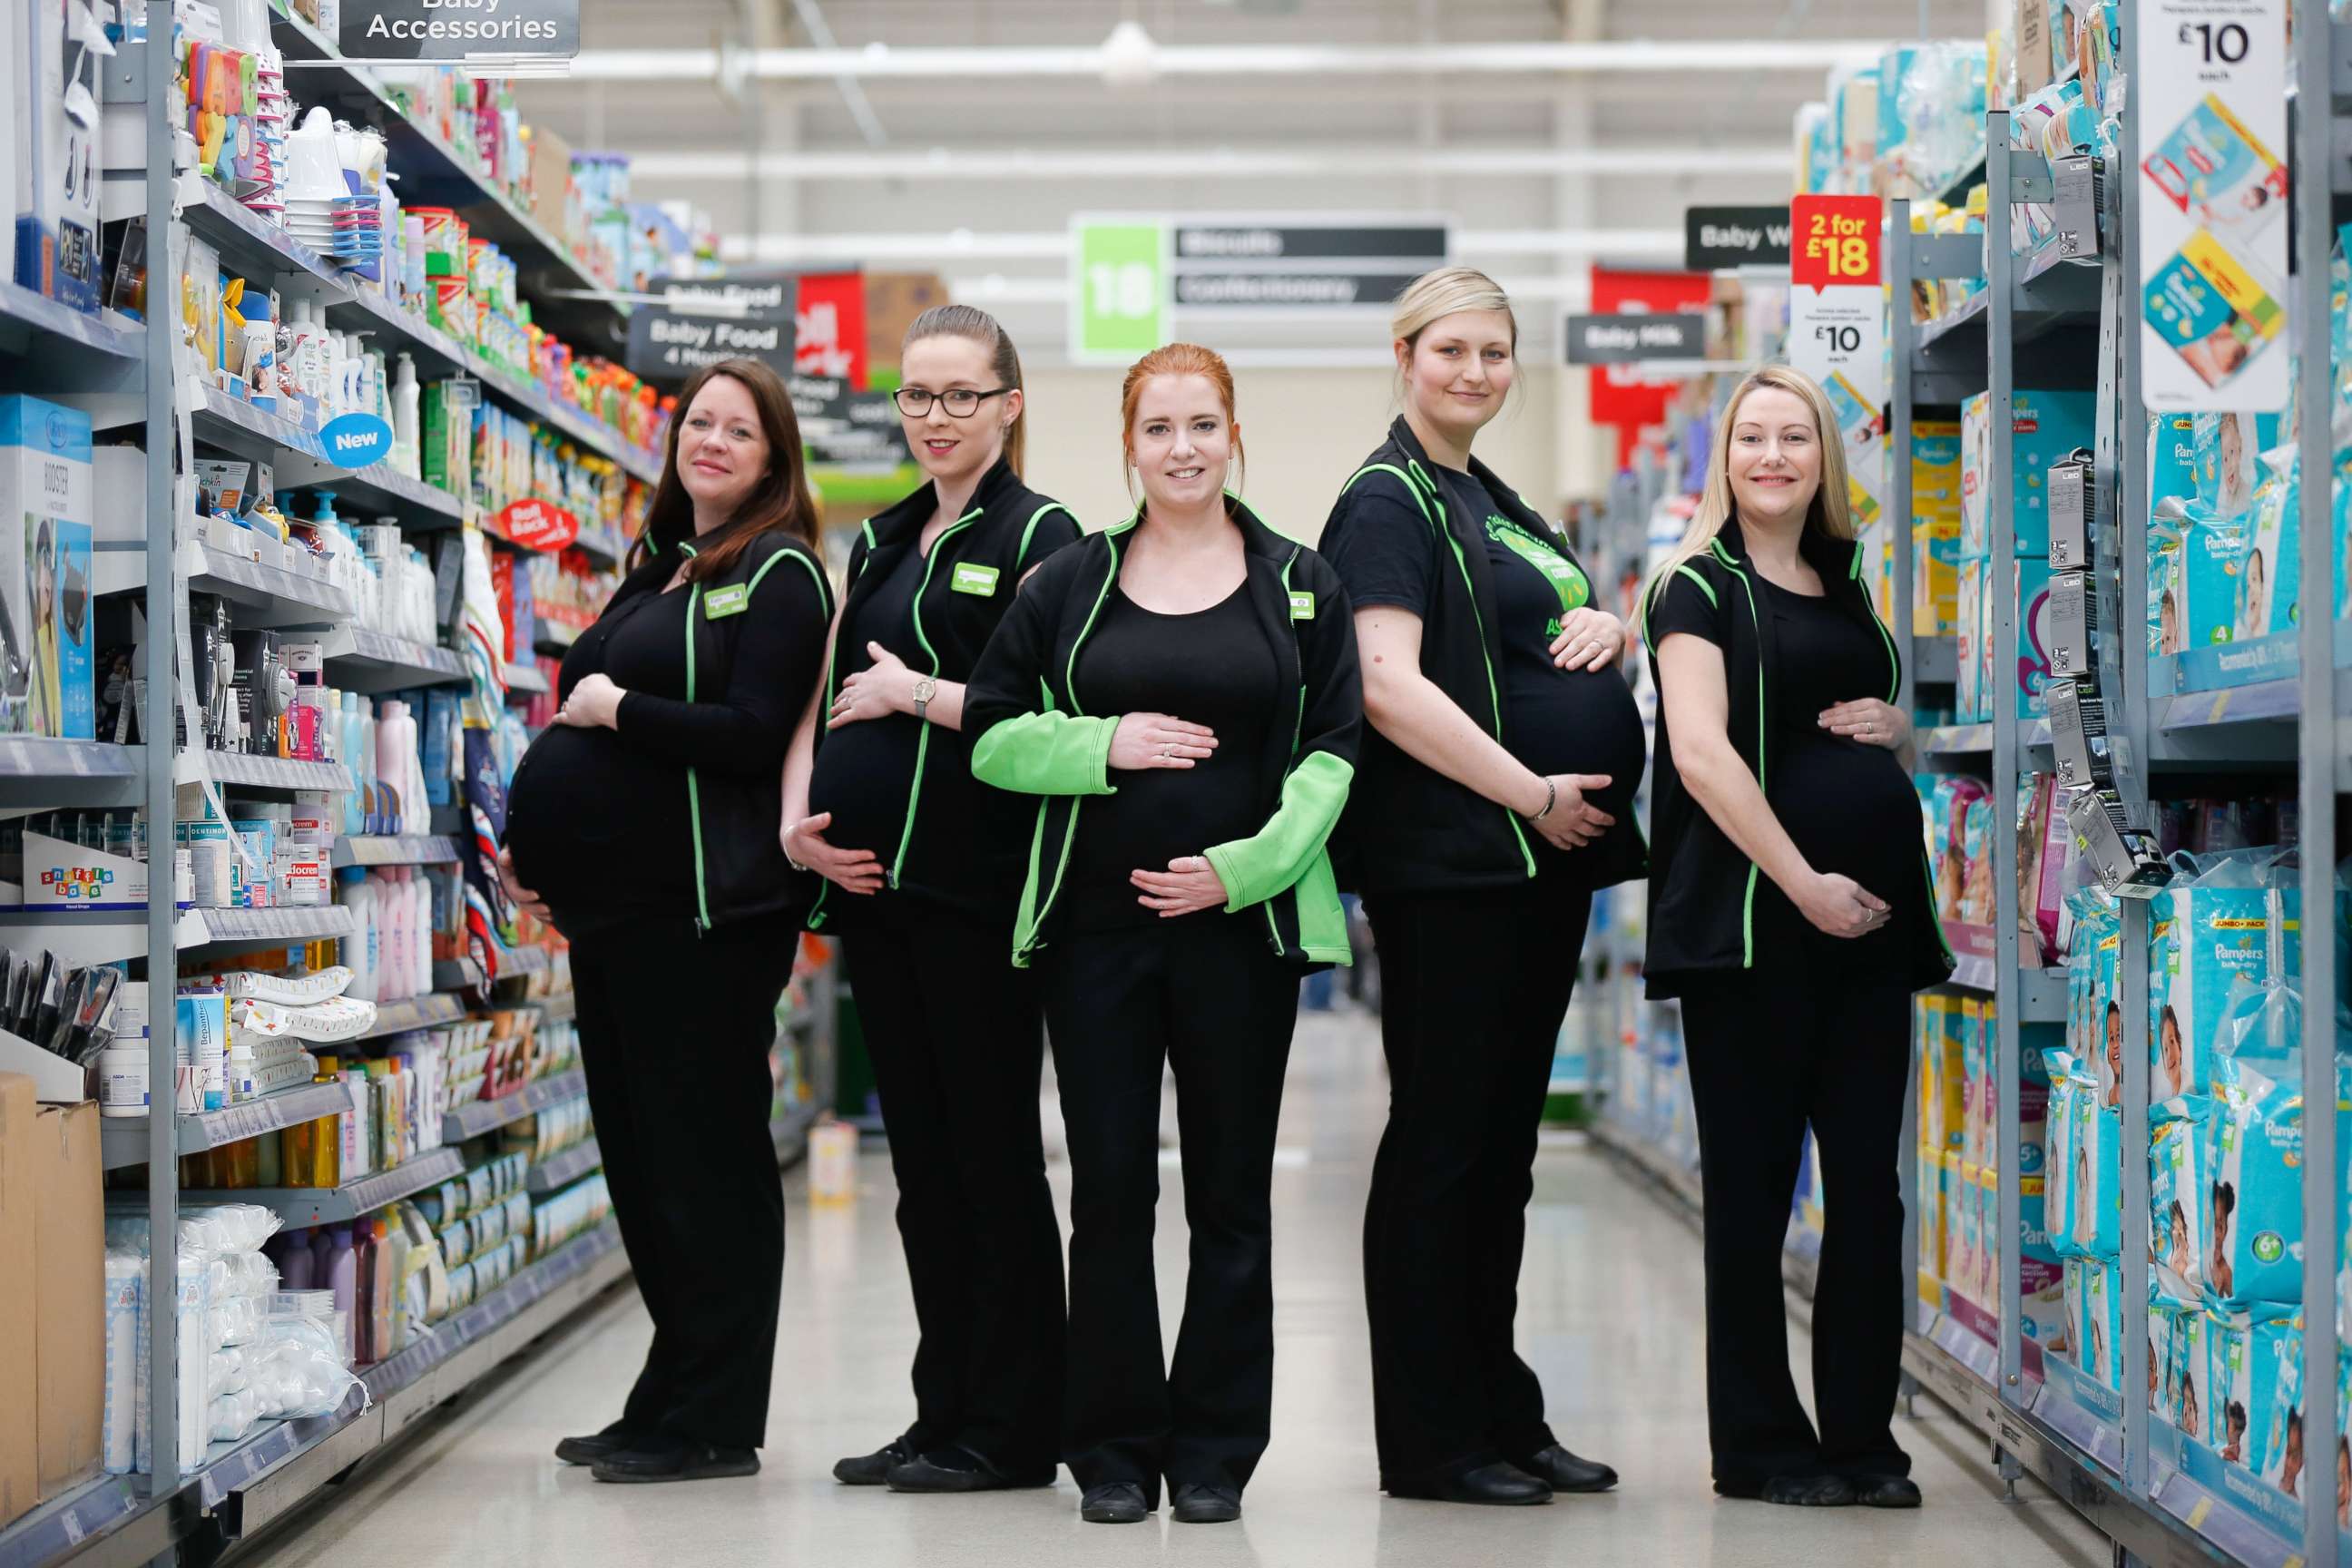 PHOTO: Rachel Hurley, 30, Kelsey McGill, 26, Sarah Cranswick, 26, Katie Mell, 40, and Kirstie Appleyard, 26, all work at the Asda Mount Pleasant supermarket in the U.K. and are expecting babies within months of one another. 